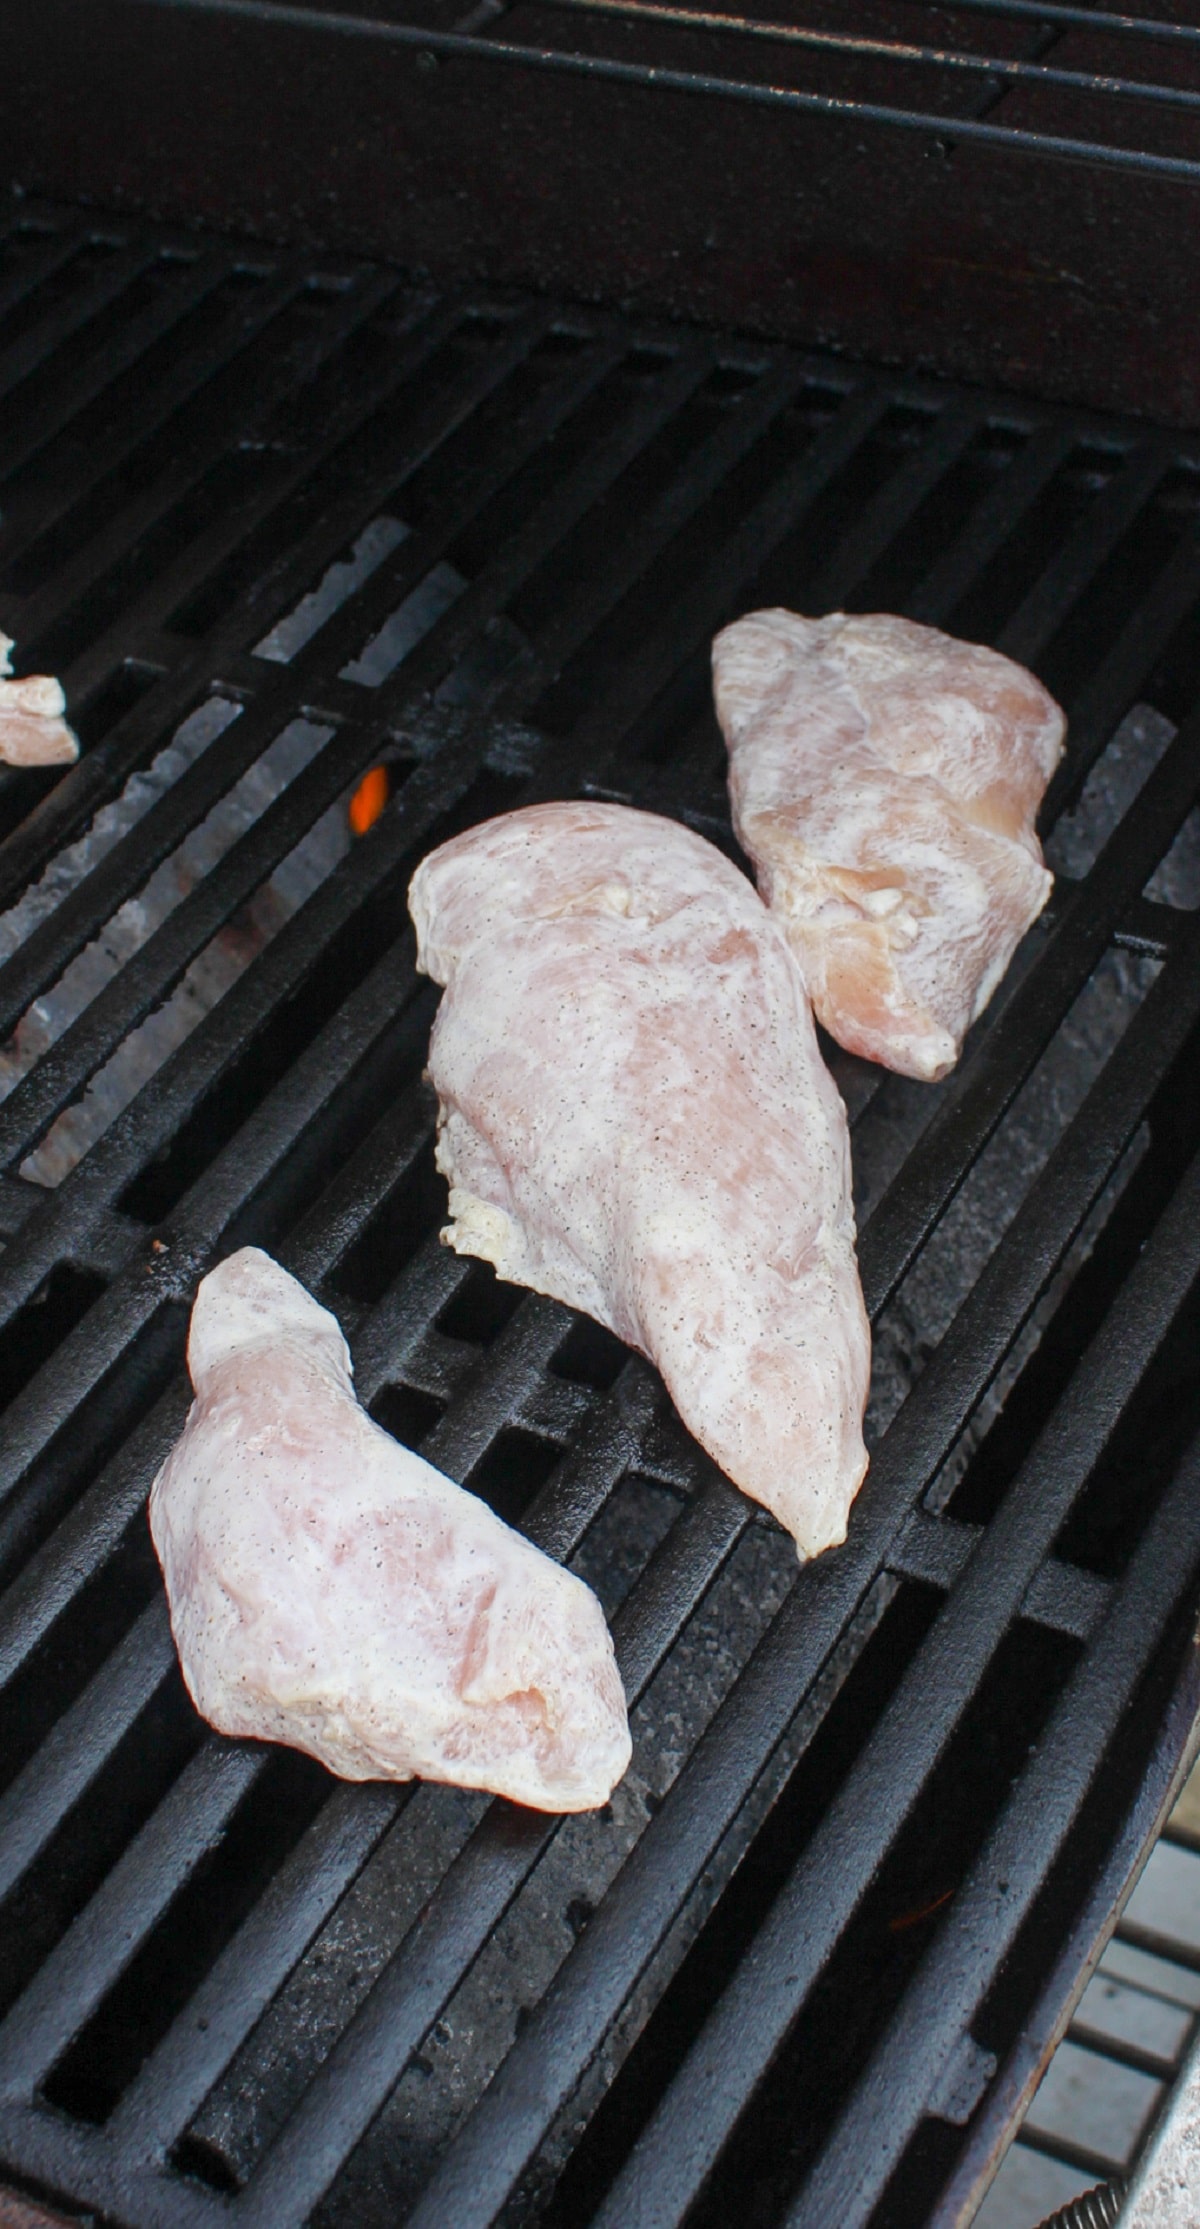 uncooked chicken on grill